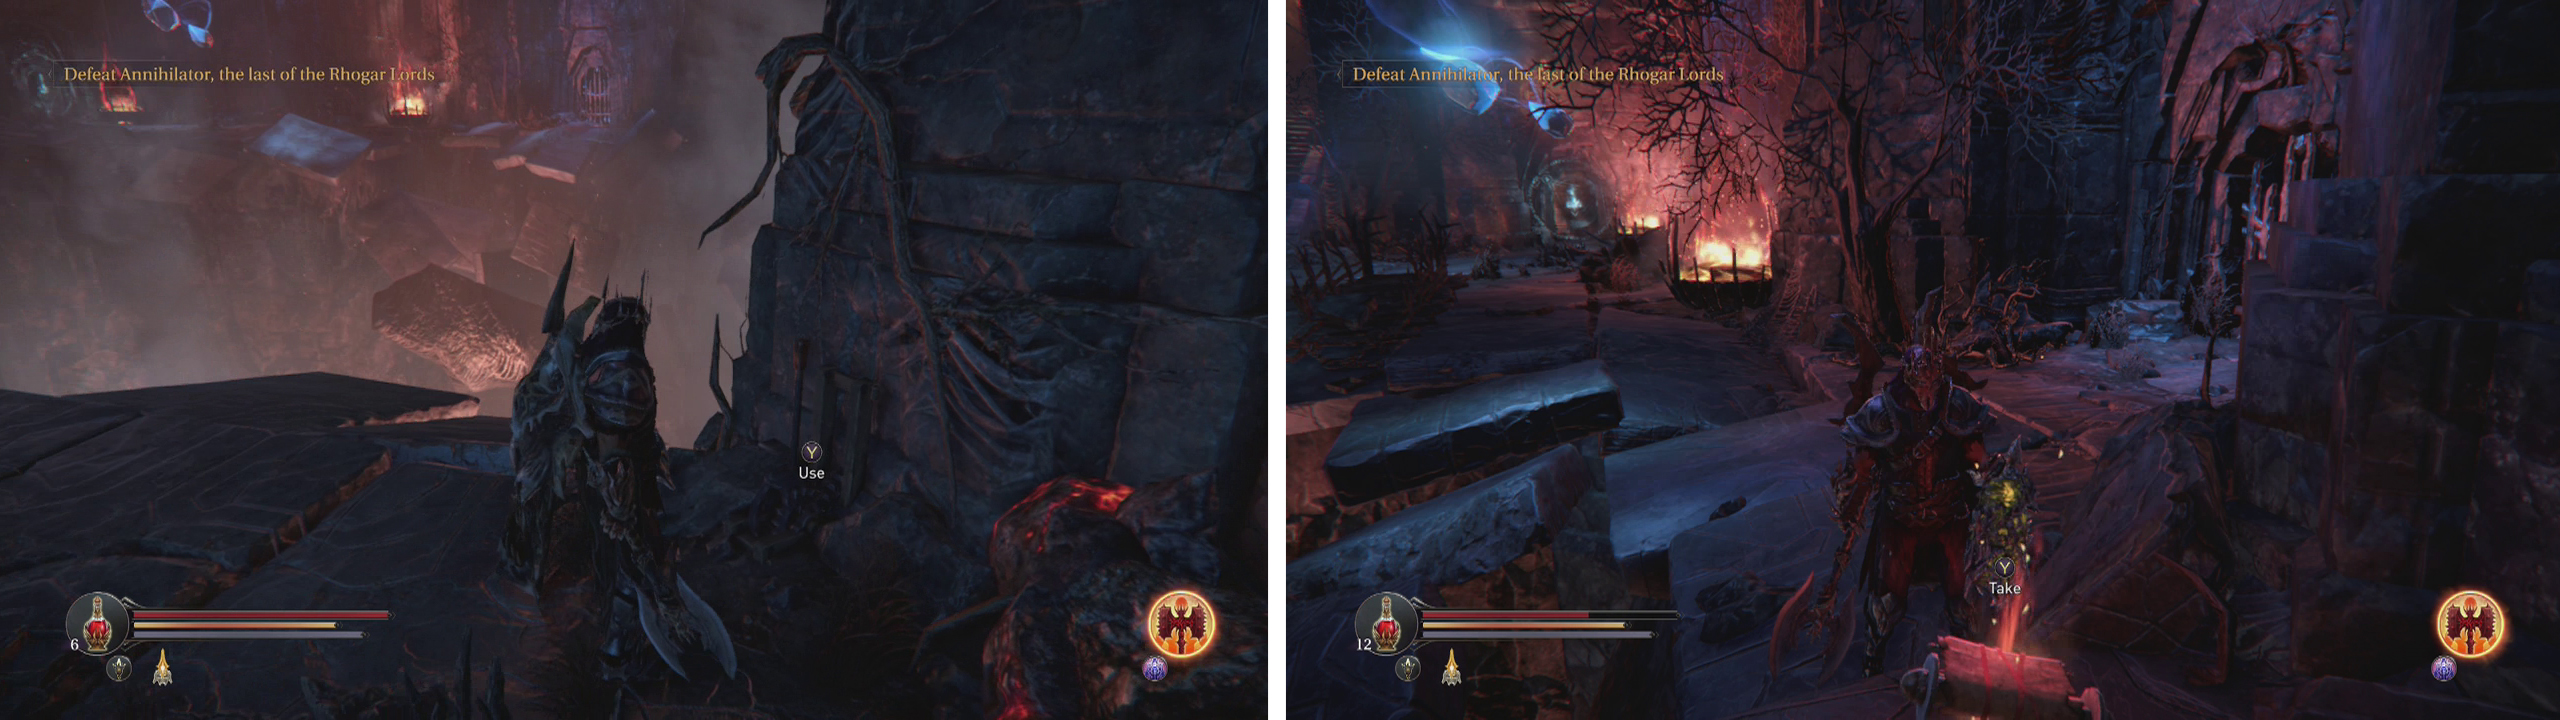 Pull the lever on the South Edge of the abyss room (left) to open the locked gate on the North side of the room (right). Inside is the Staff's Head quest item.